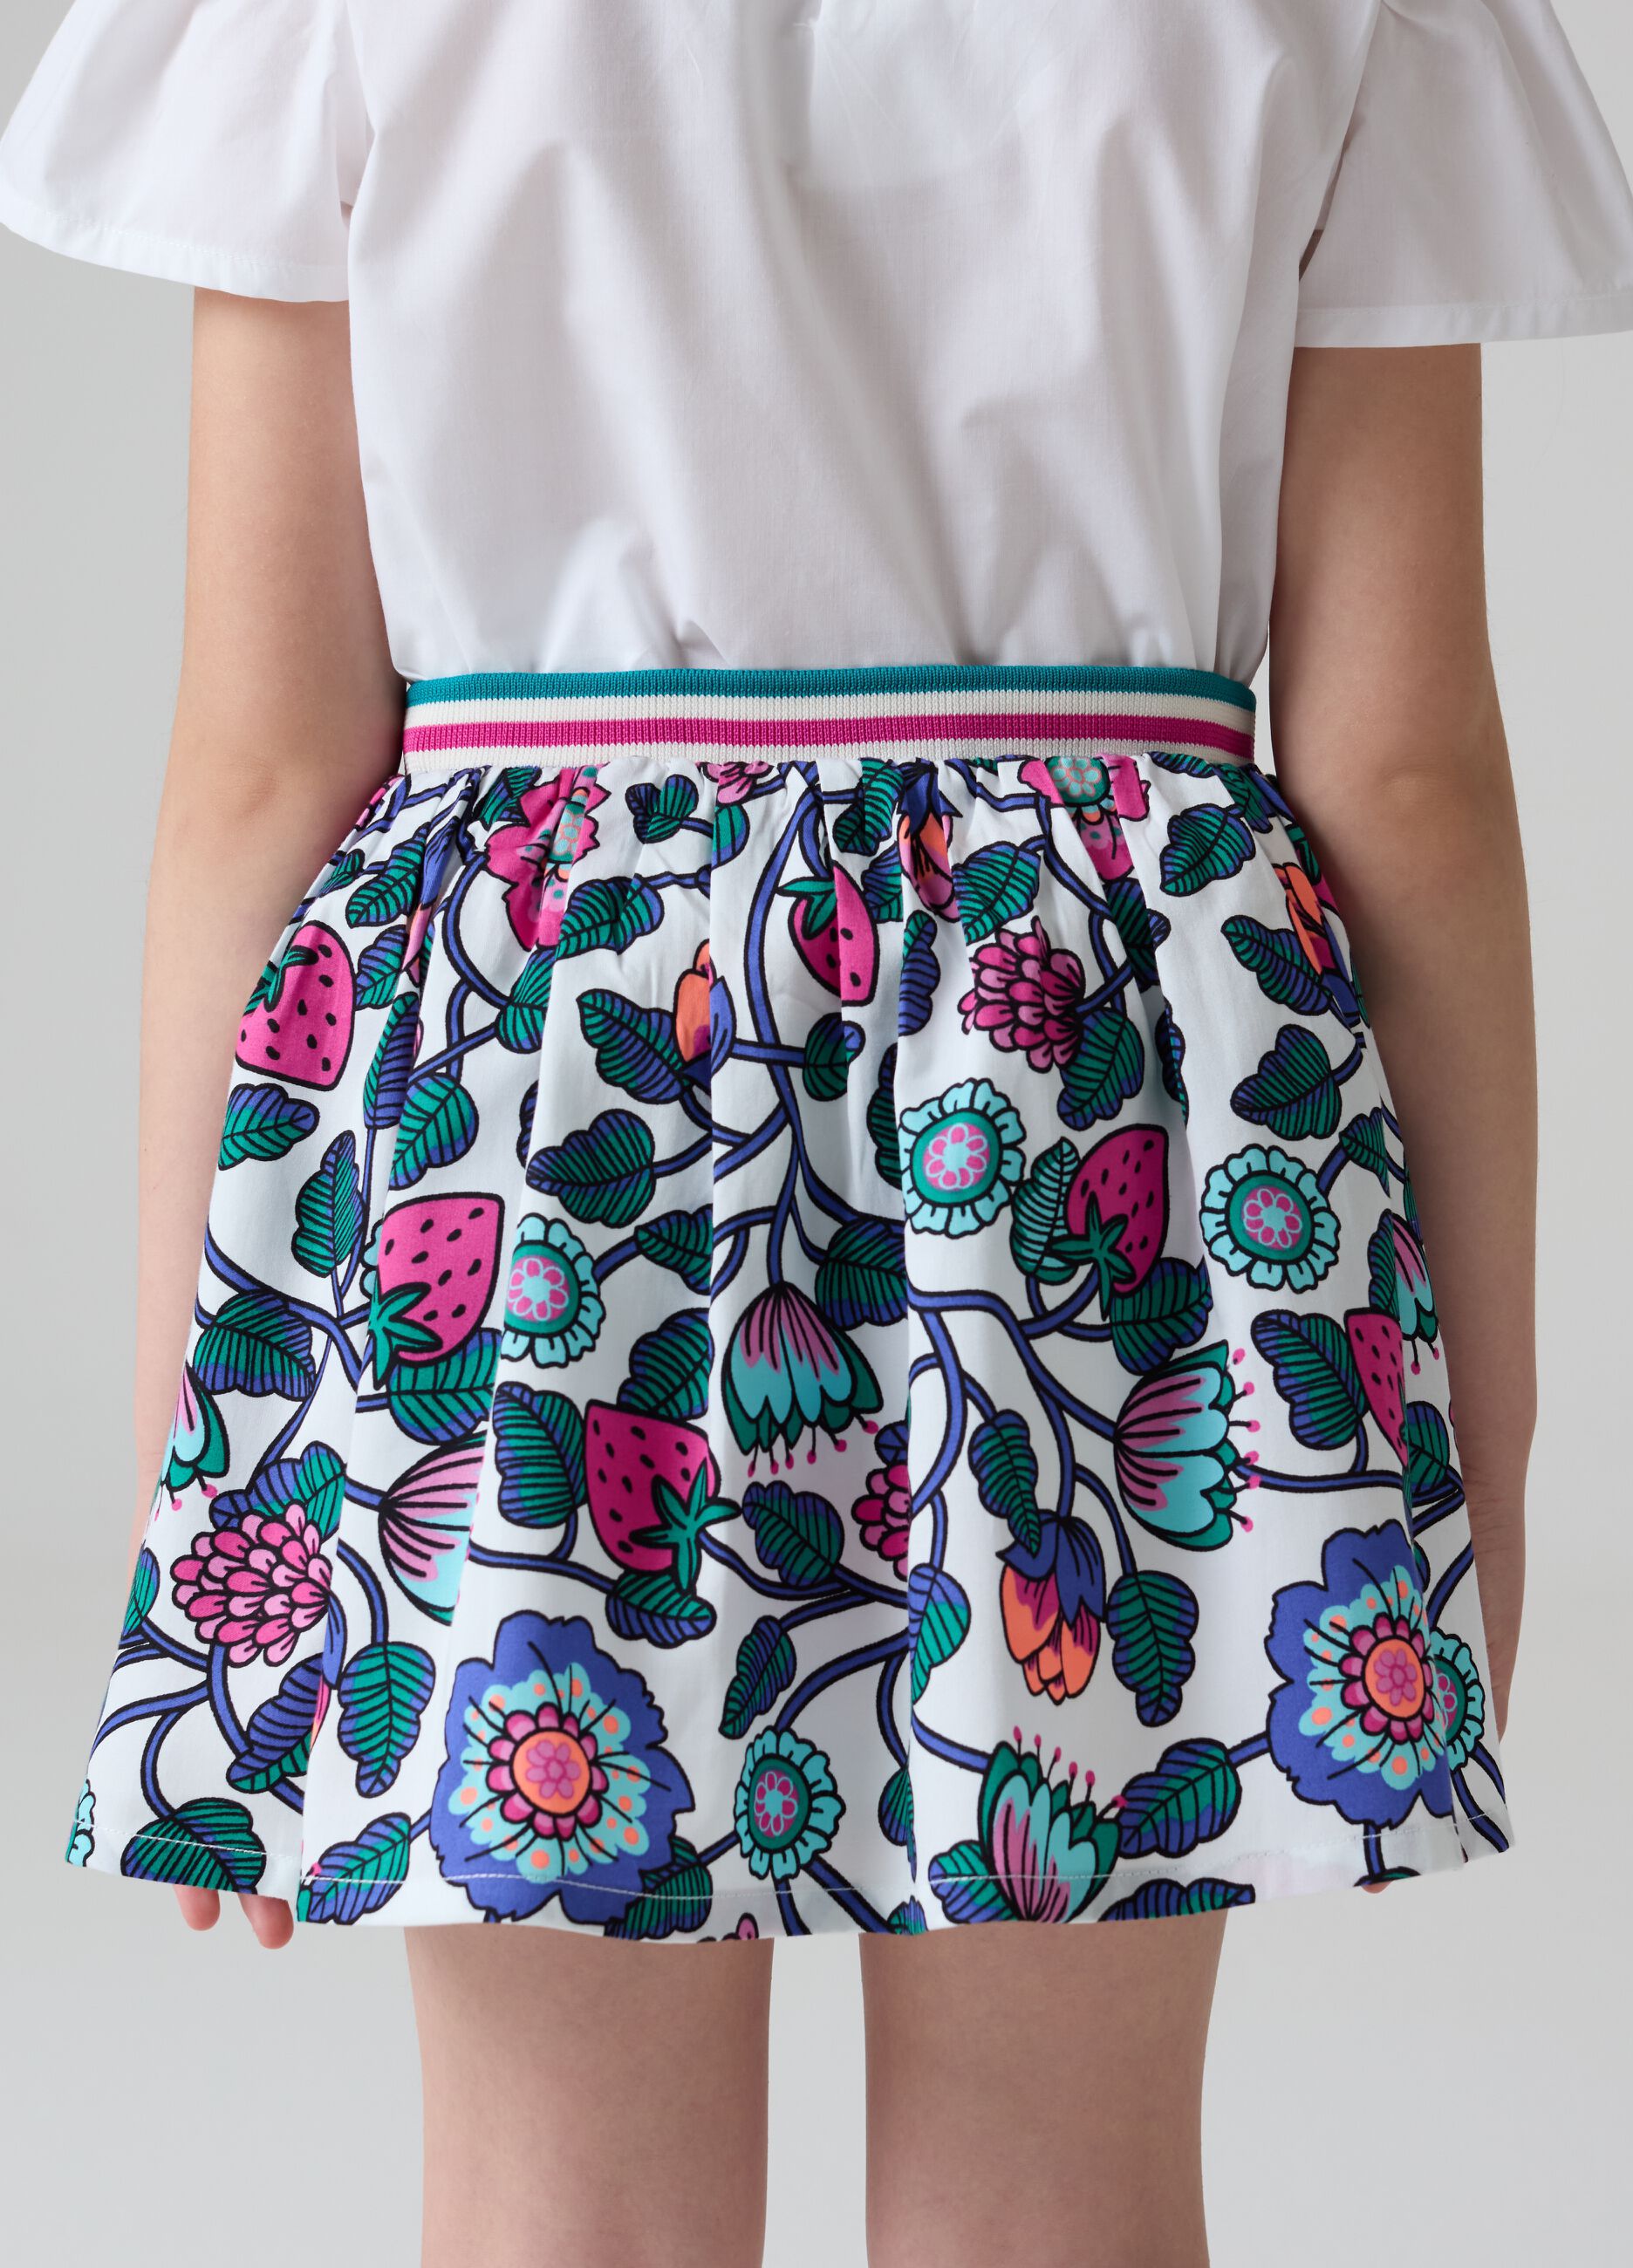 Cotton skirt with strawberries print